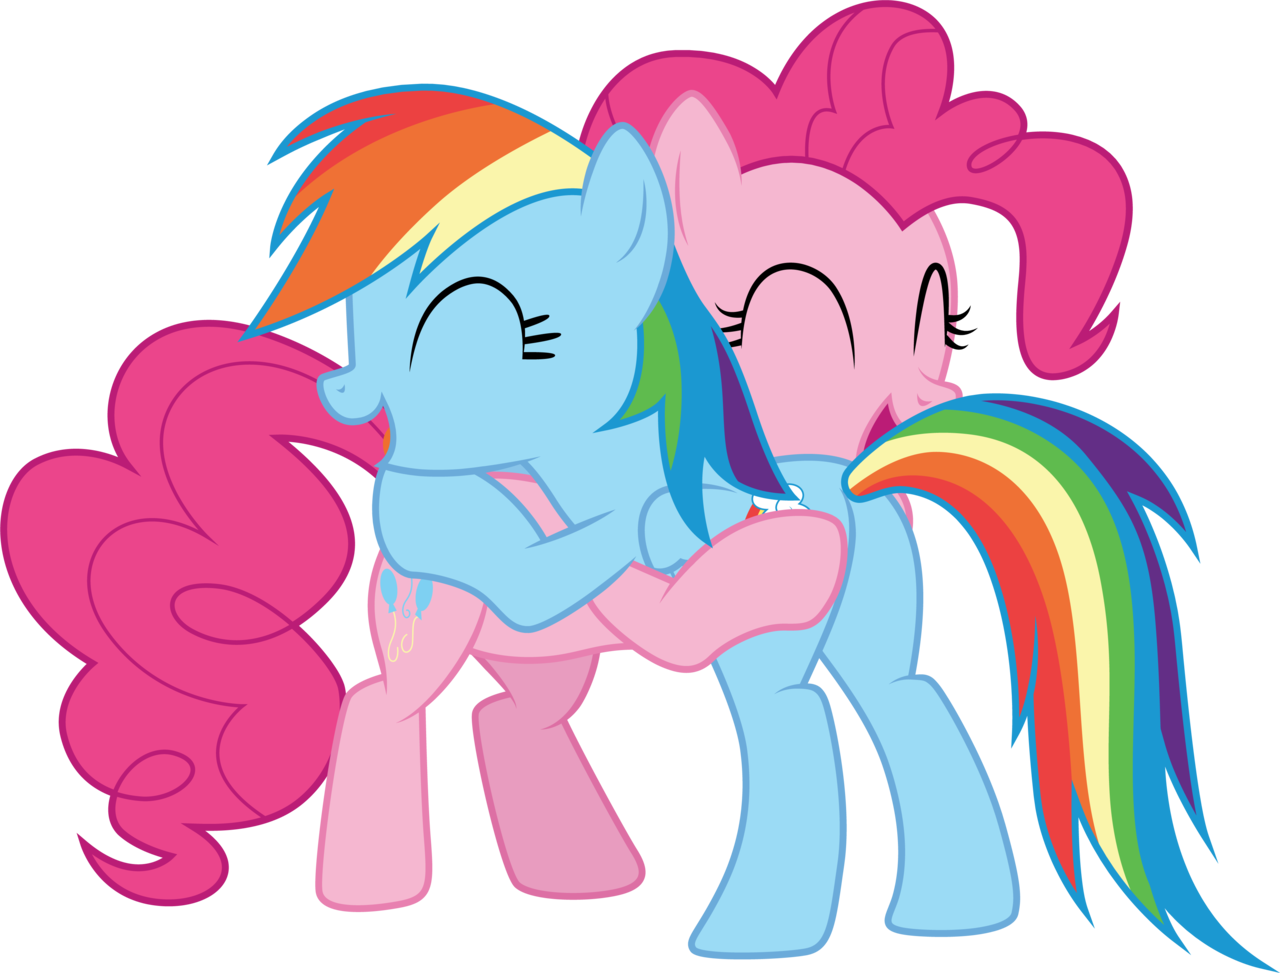 Pinkie Pie And Rainbow Dash Hugging By Cloudyglow - Pinkie Pie And Rainbow Dash (1280x973)